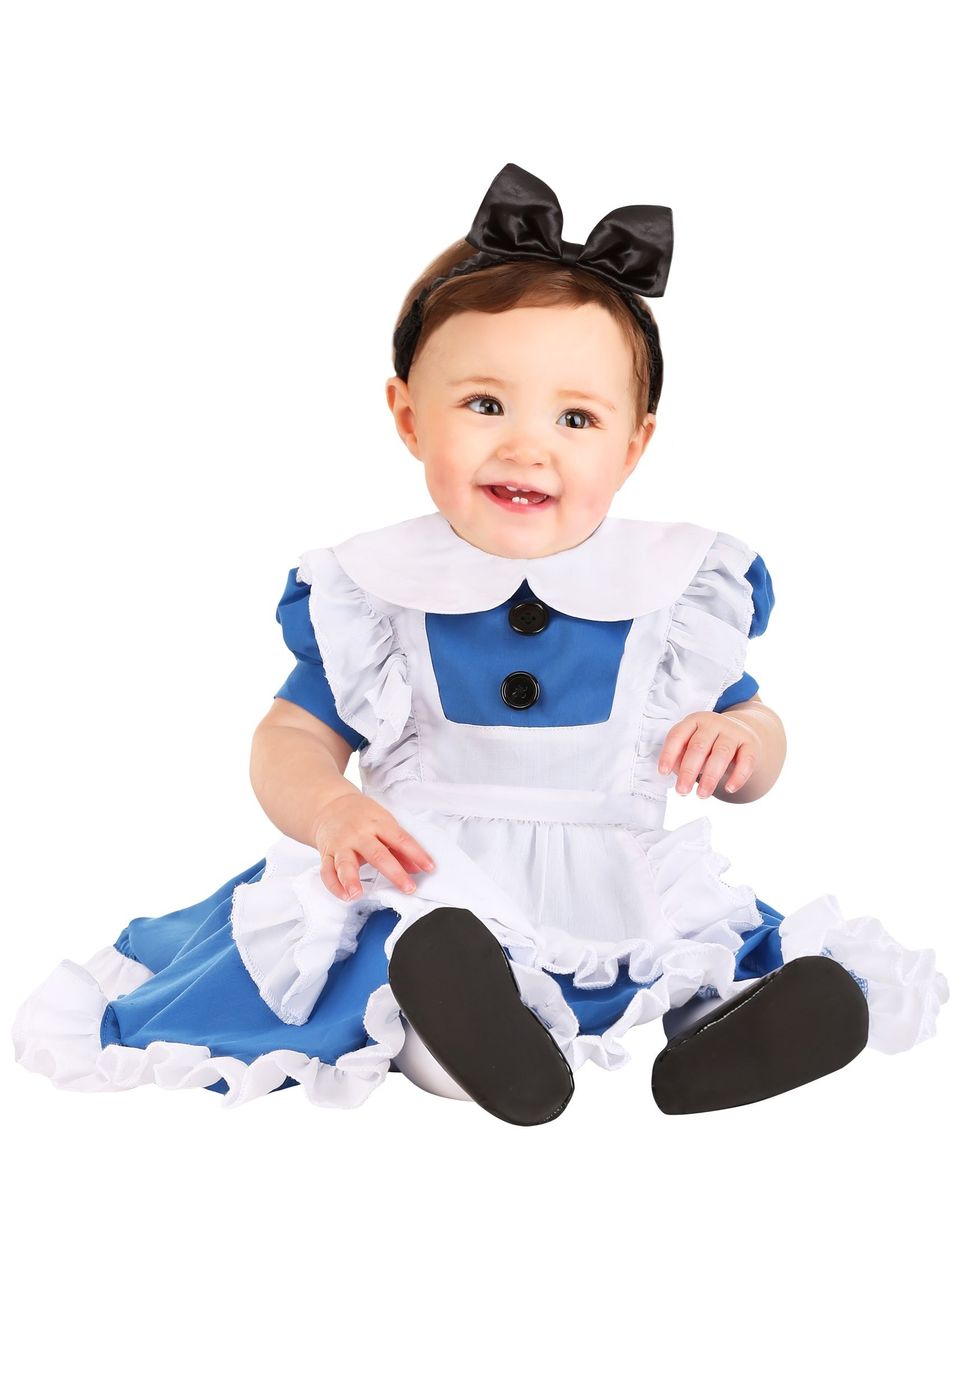 44 Baby Costume Ideas For Halloween - Brit + Co